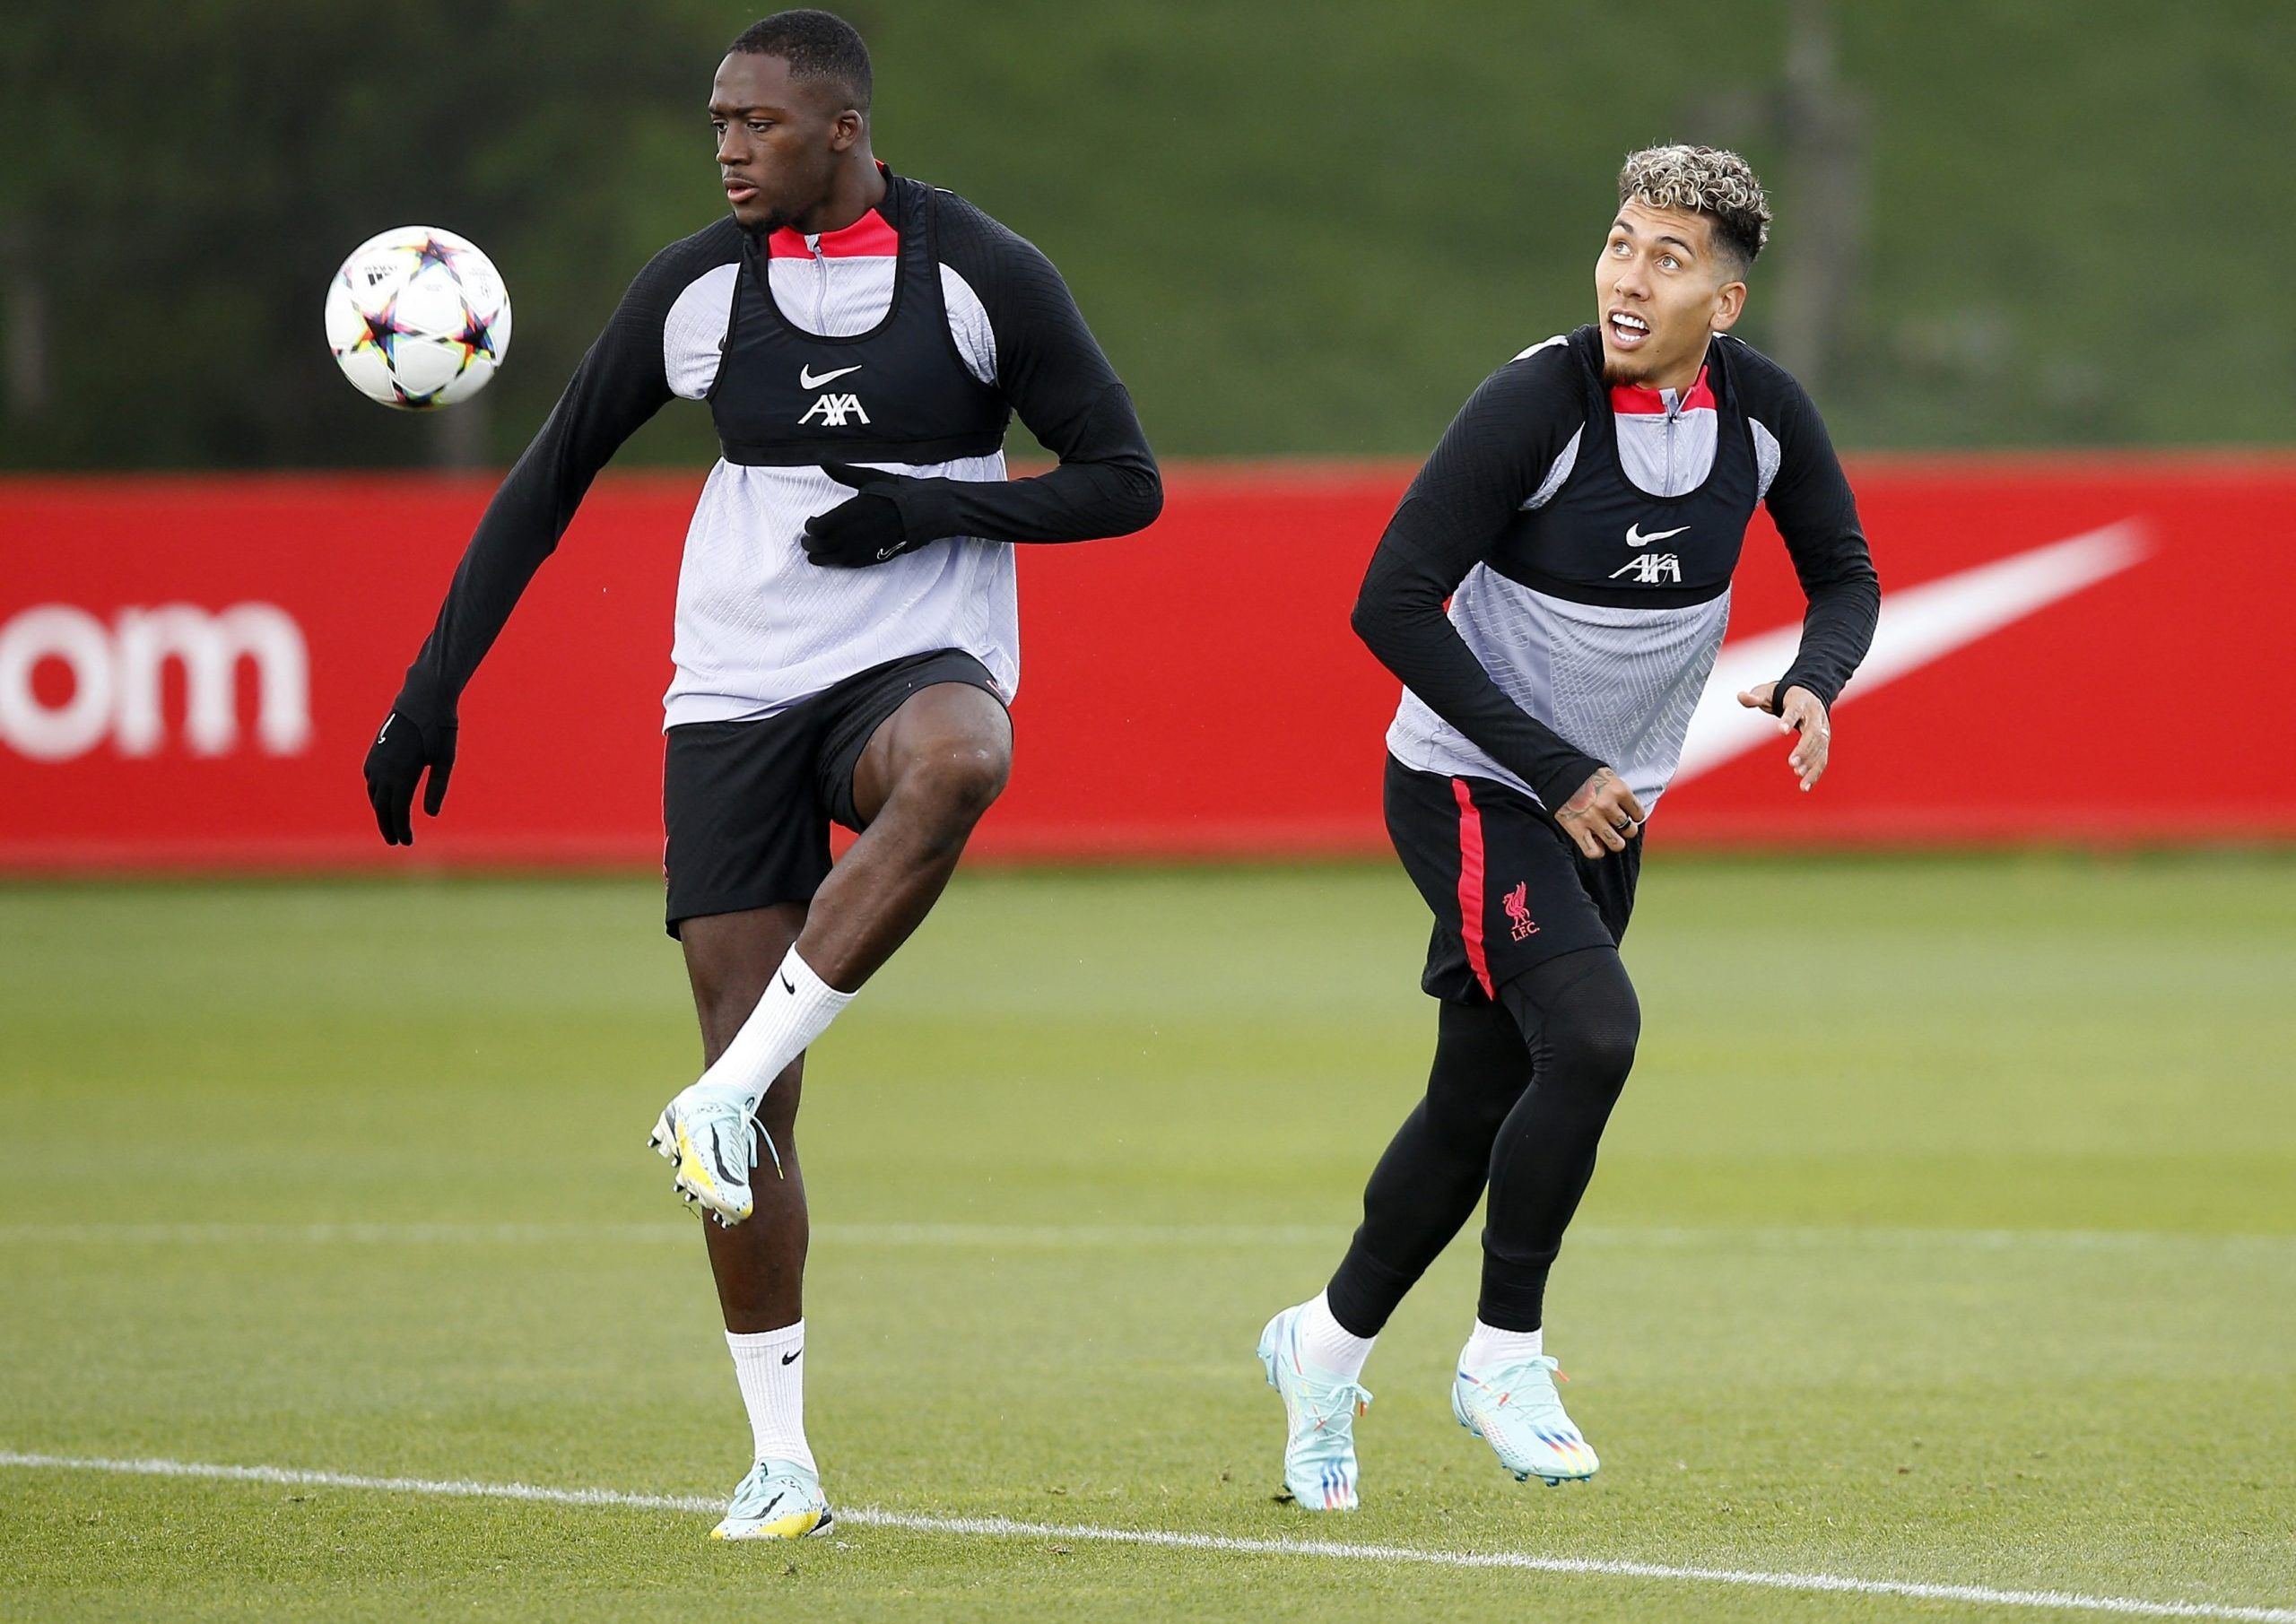 Soccer Football - Champions League - Liverpool Training - AXA Training Centre, Liverpool, Britain - October 11, 2022 Liverpool's Ibrahima Konate and Roberto Firmino during training Action Images via Reuters/Craig Brough